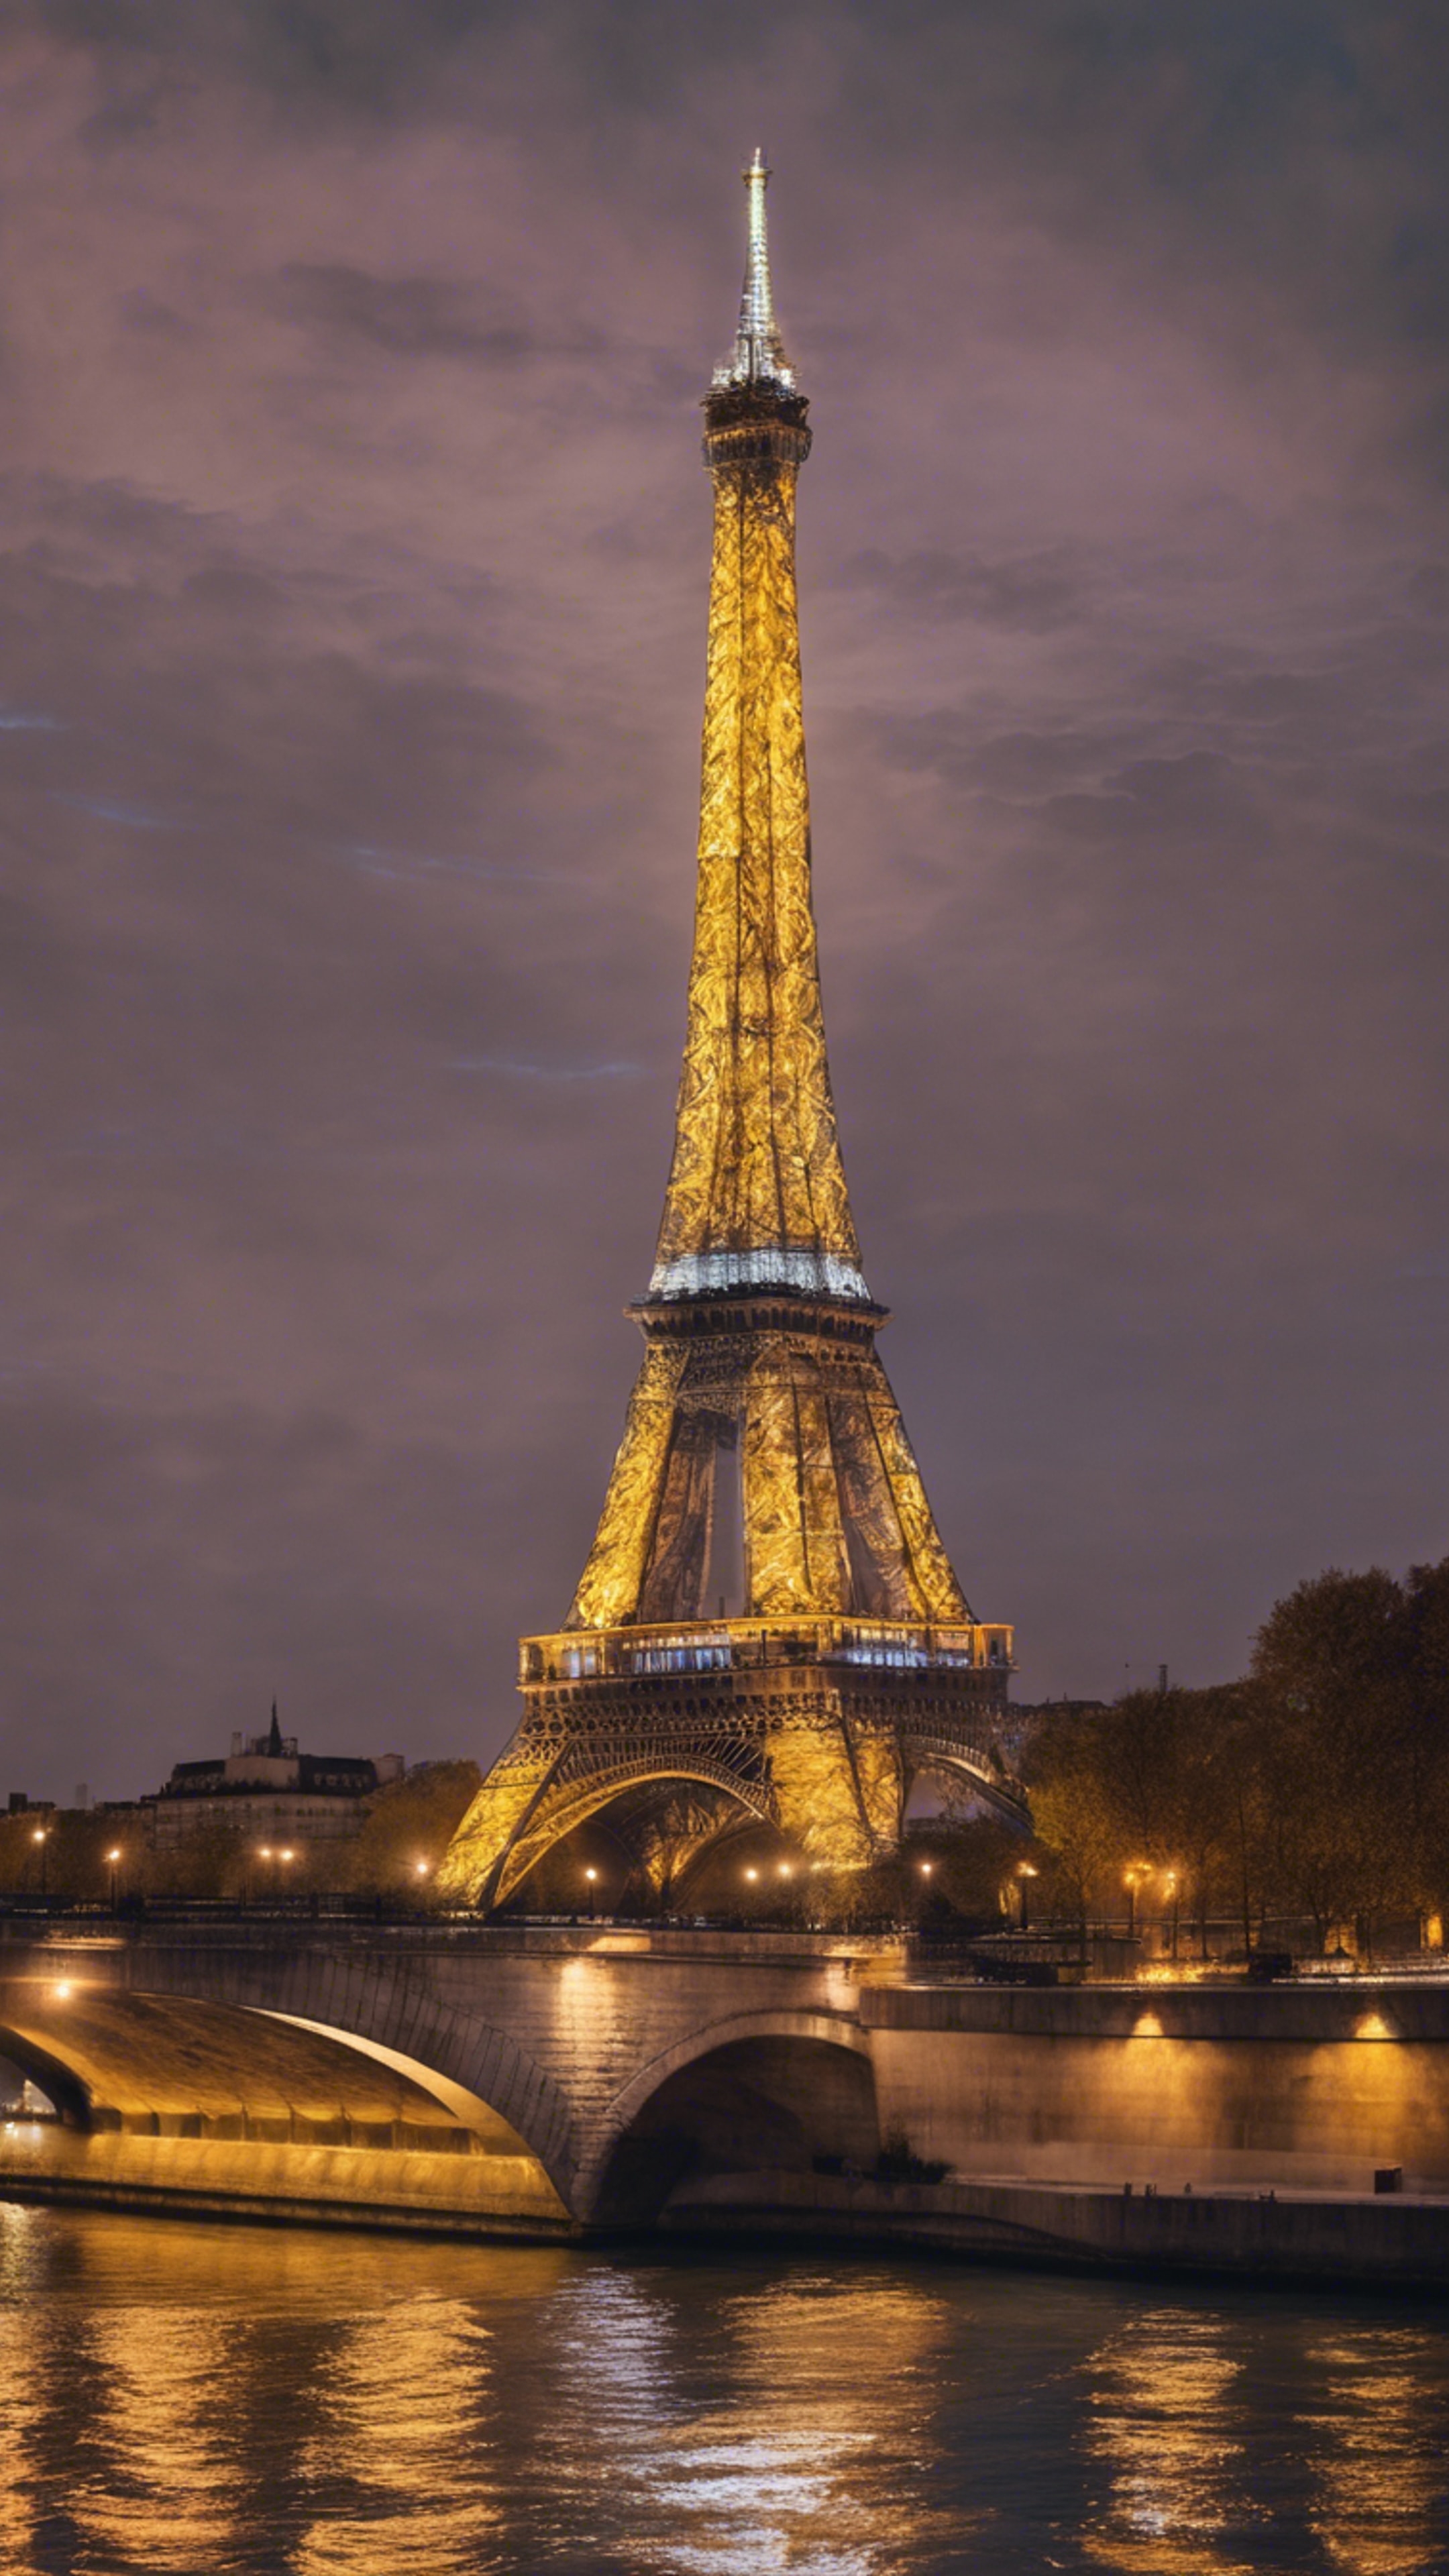 Eiffel tower illuminated against the Paris skyline at night, reflecting in the smooth waters of the river Seine. Tapeet[bfd7e83086d14adeb14c]